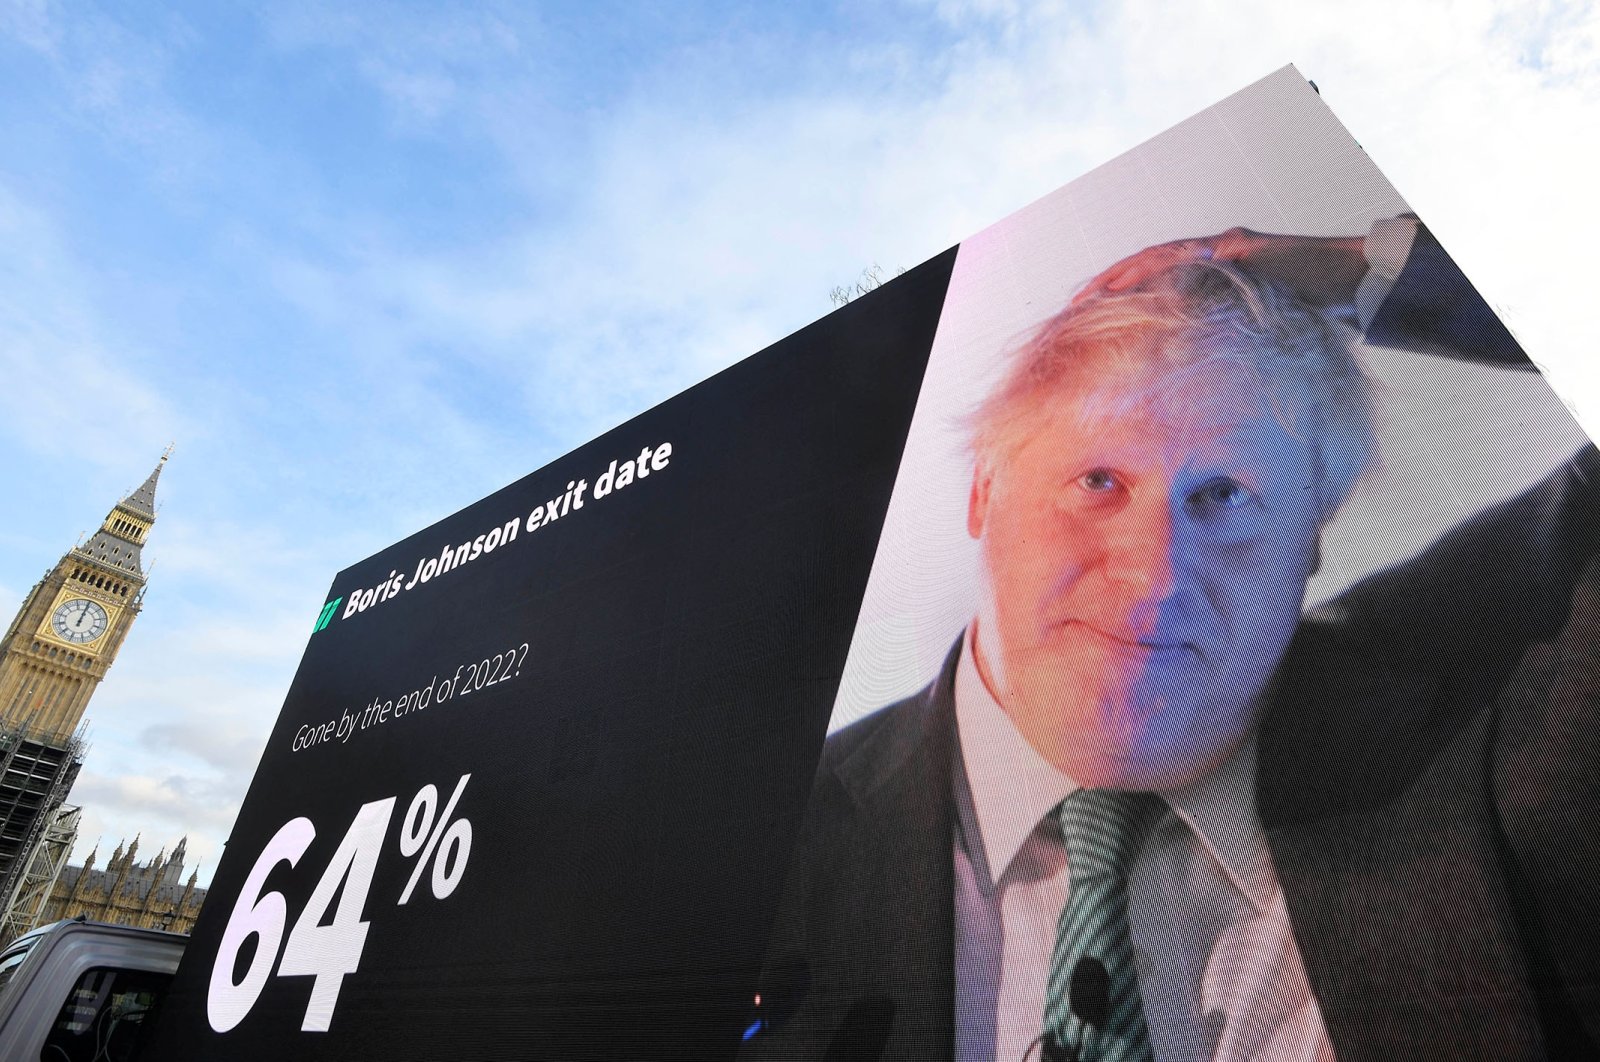 An electronic billboard displaying a prediction for the departure of British Prime Minister Boris Johnson is driven near the Houses of Parliament in London, Britain, Jan. 28, 2022. (Reuters Photo)